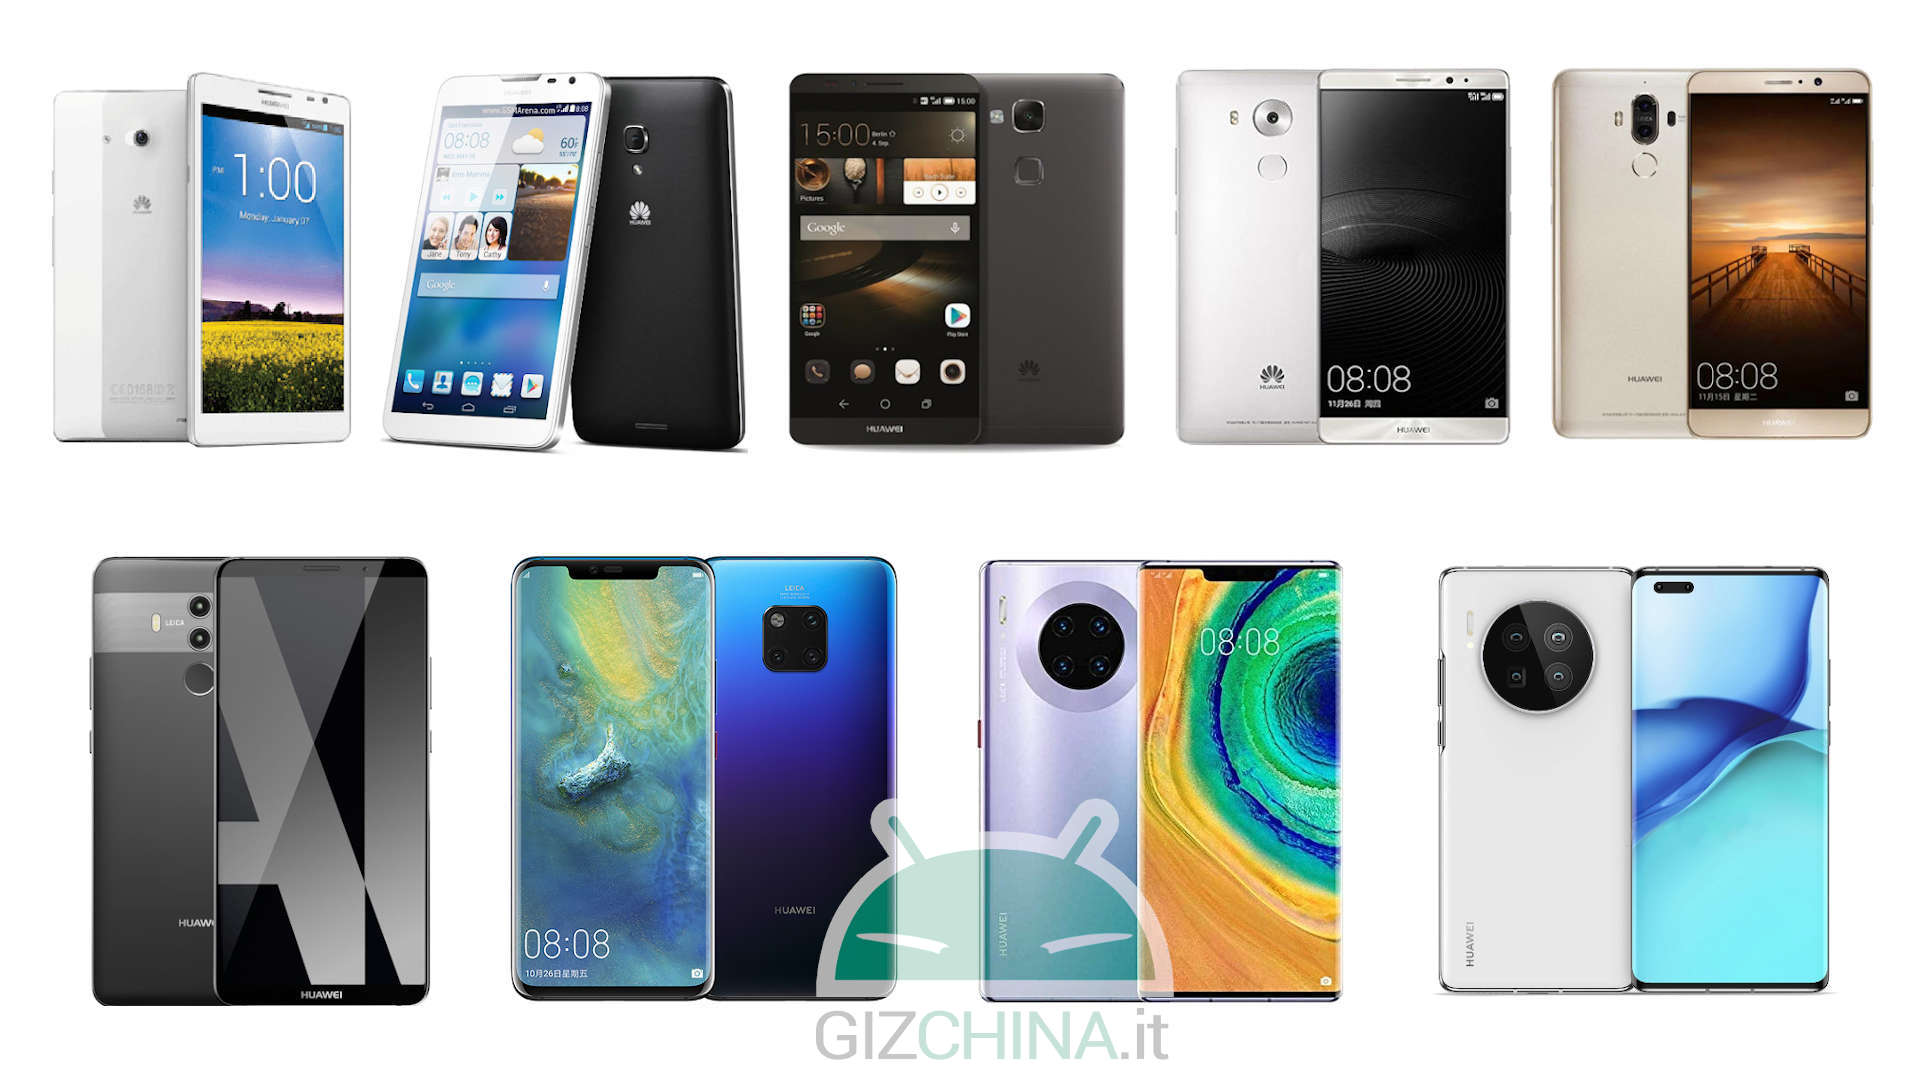 klei Fruitig Analist Waiting for Huawei Mate 40: let's retrace the history of the Mate series